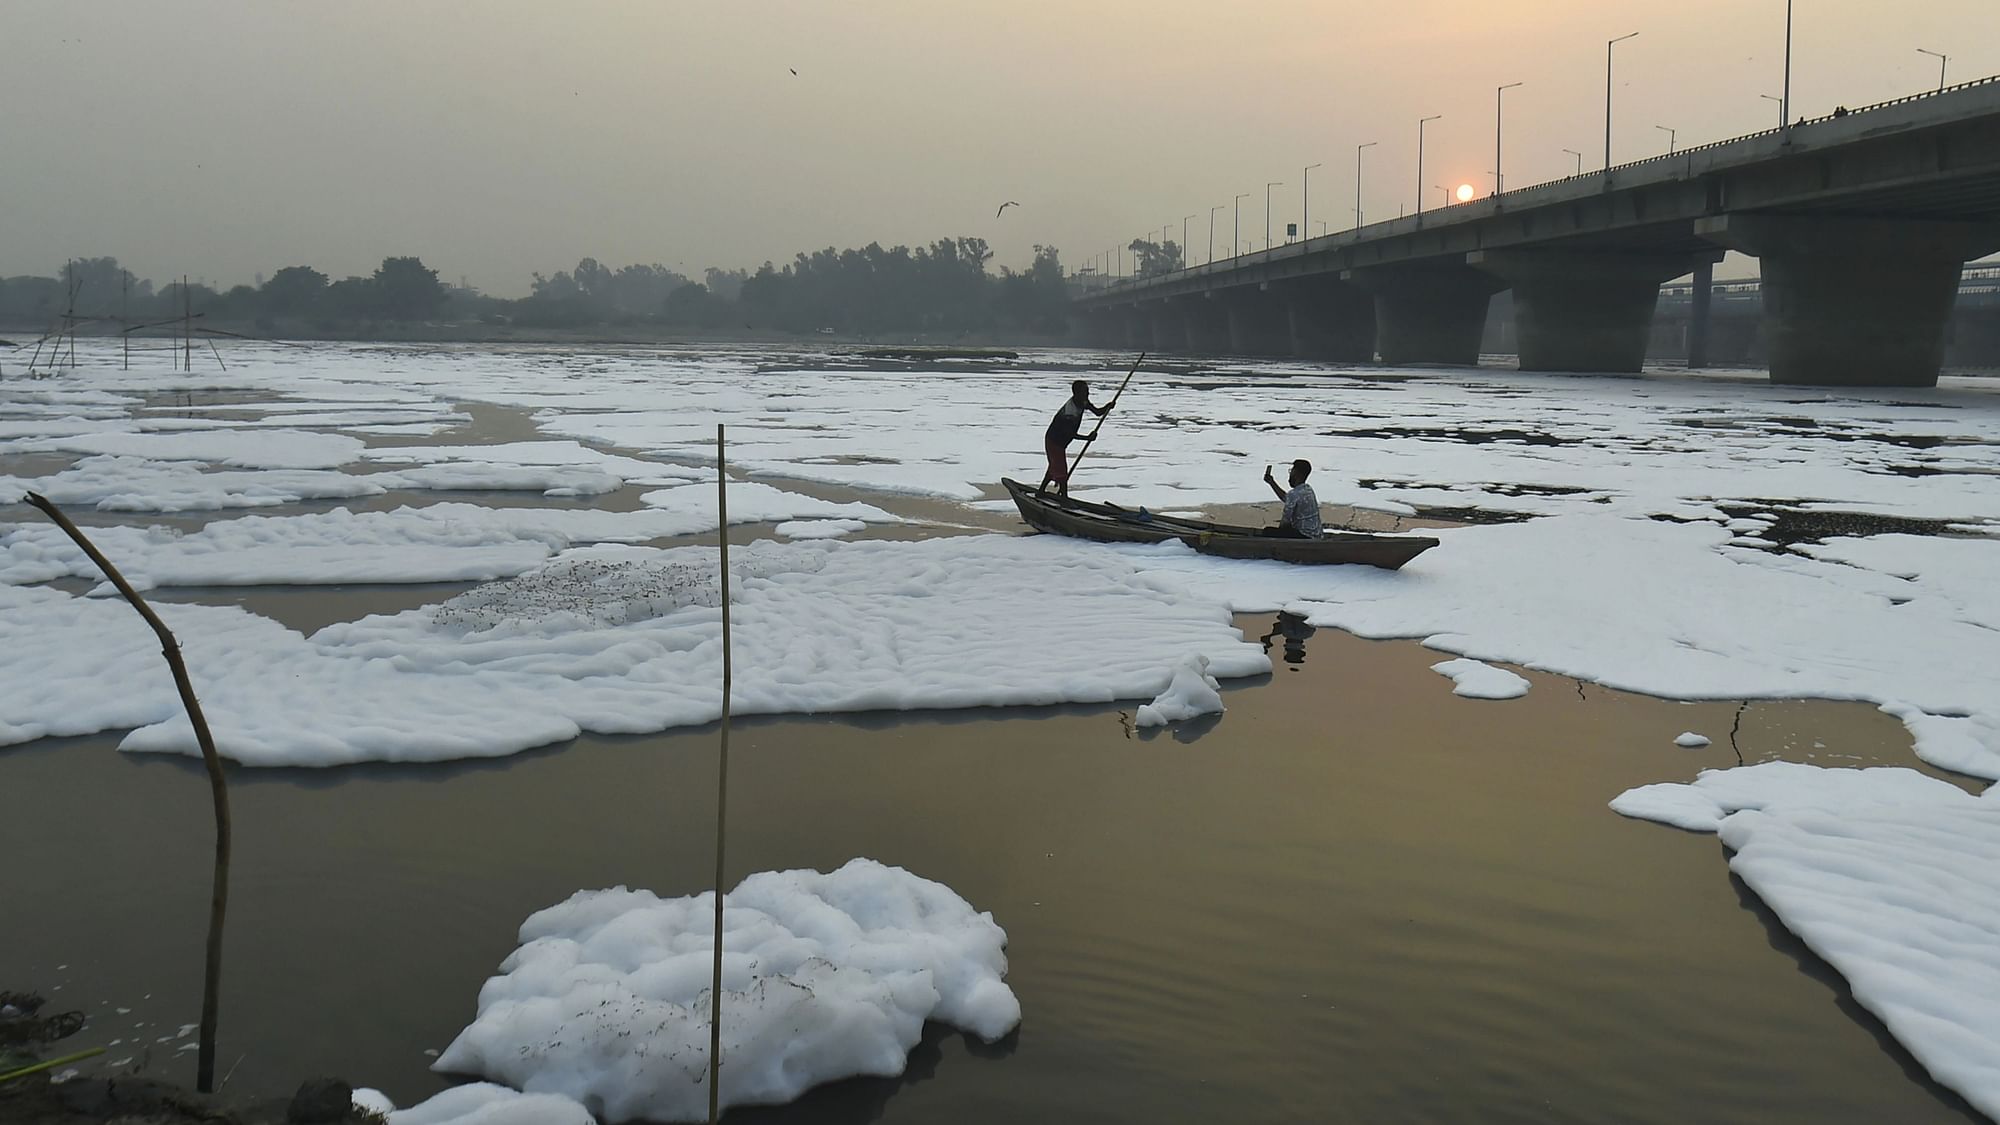 <div class="paragraphs"><p>New Delhi: A boatman moves through a froth-laden polluted Yamuna river, as smog engulfs the sky during sunset, at Kalindi Kunj in New Delhi.</p></div>